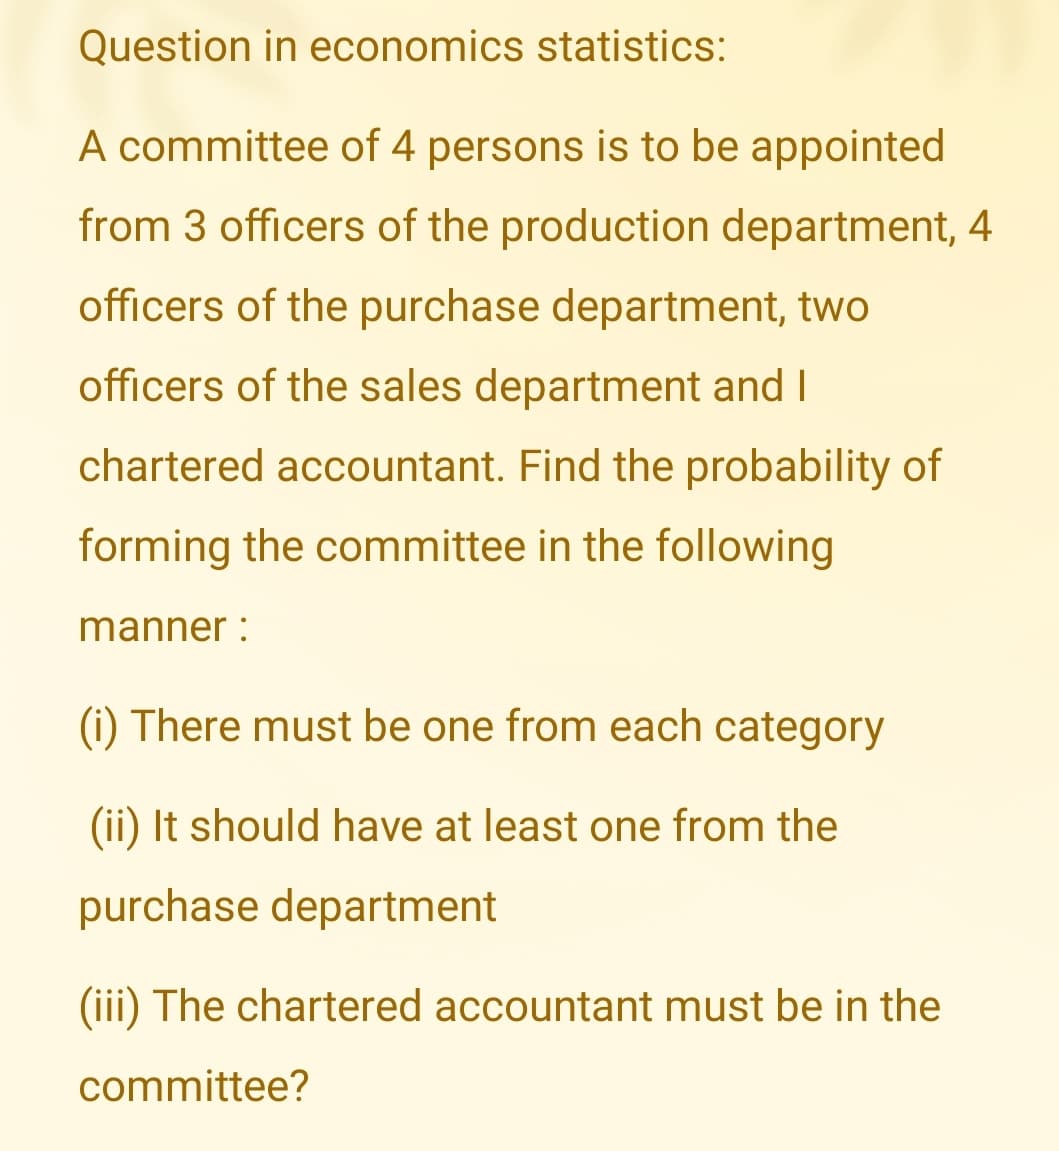 Question in economics statistics:
A committee of 4 persons is to be appointed
from 3 officers of the production department, 4
officers of the purchase department, two
officers of the sales department and I
chartered accountant. Find the probability of
forming the committee in the following
manner :
(i) There must be one from each category
(ii) It should have at least one from the
purchase department
(iii) The chartered accountant must be in the
committee?
